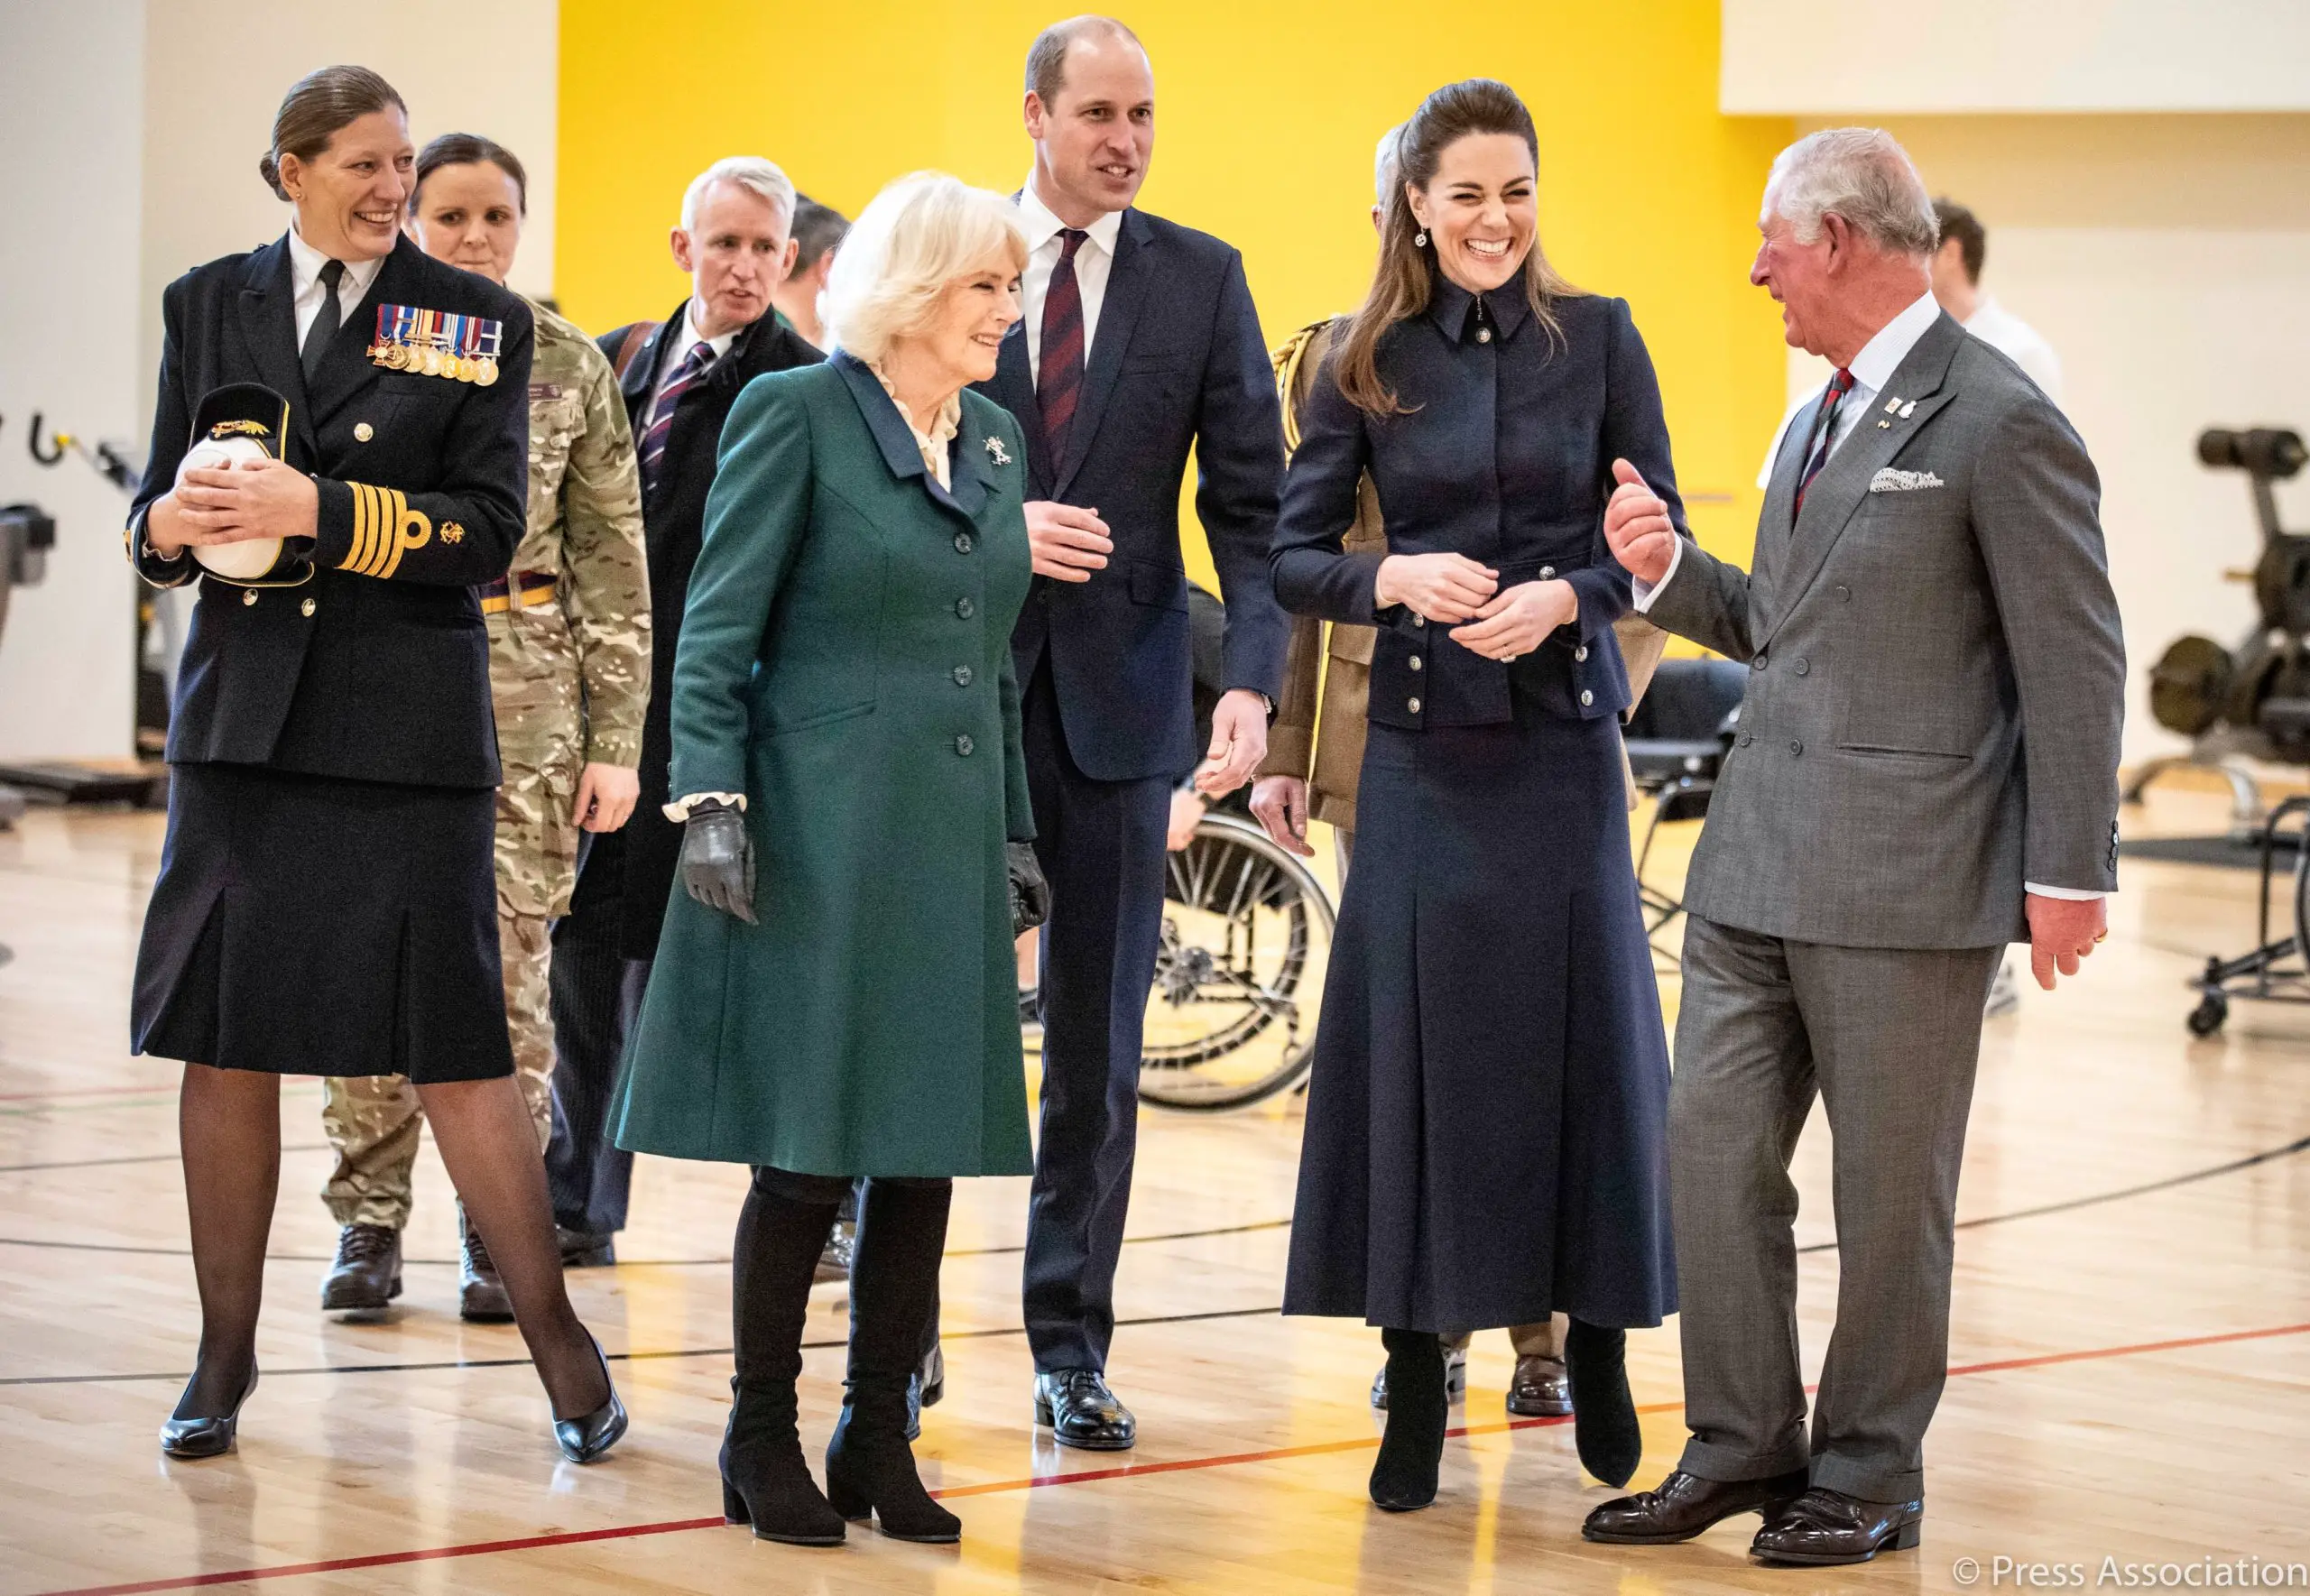 The Duke and duchess of Cambridge joined Prince Charles and Duchess of Cornwall Camilla for a joint engagement leicestershire